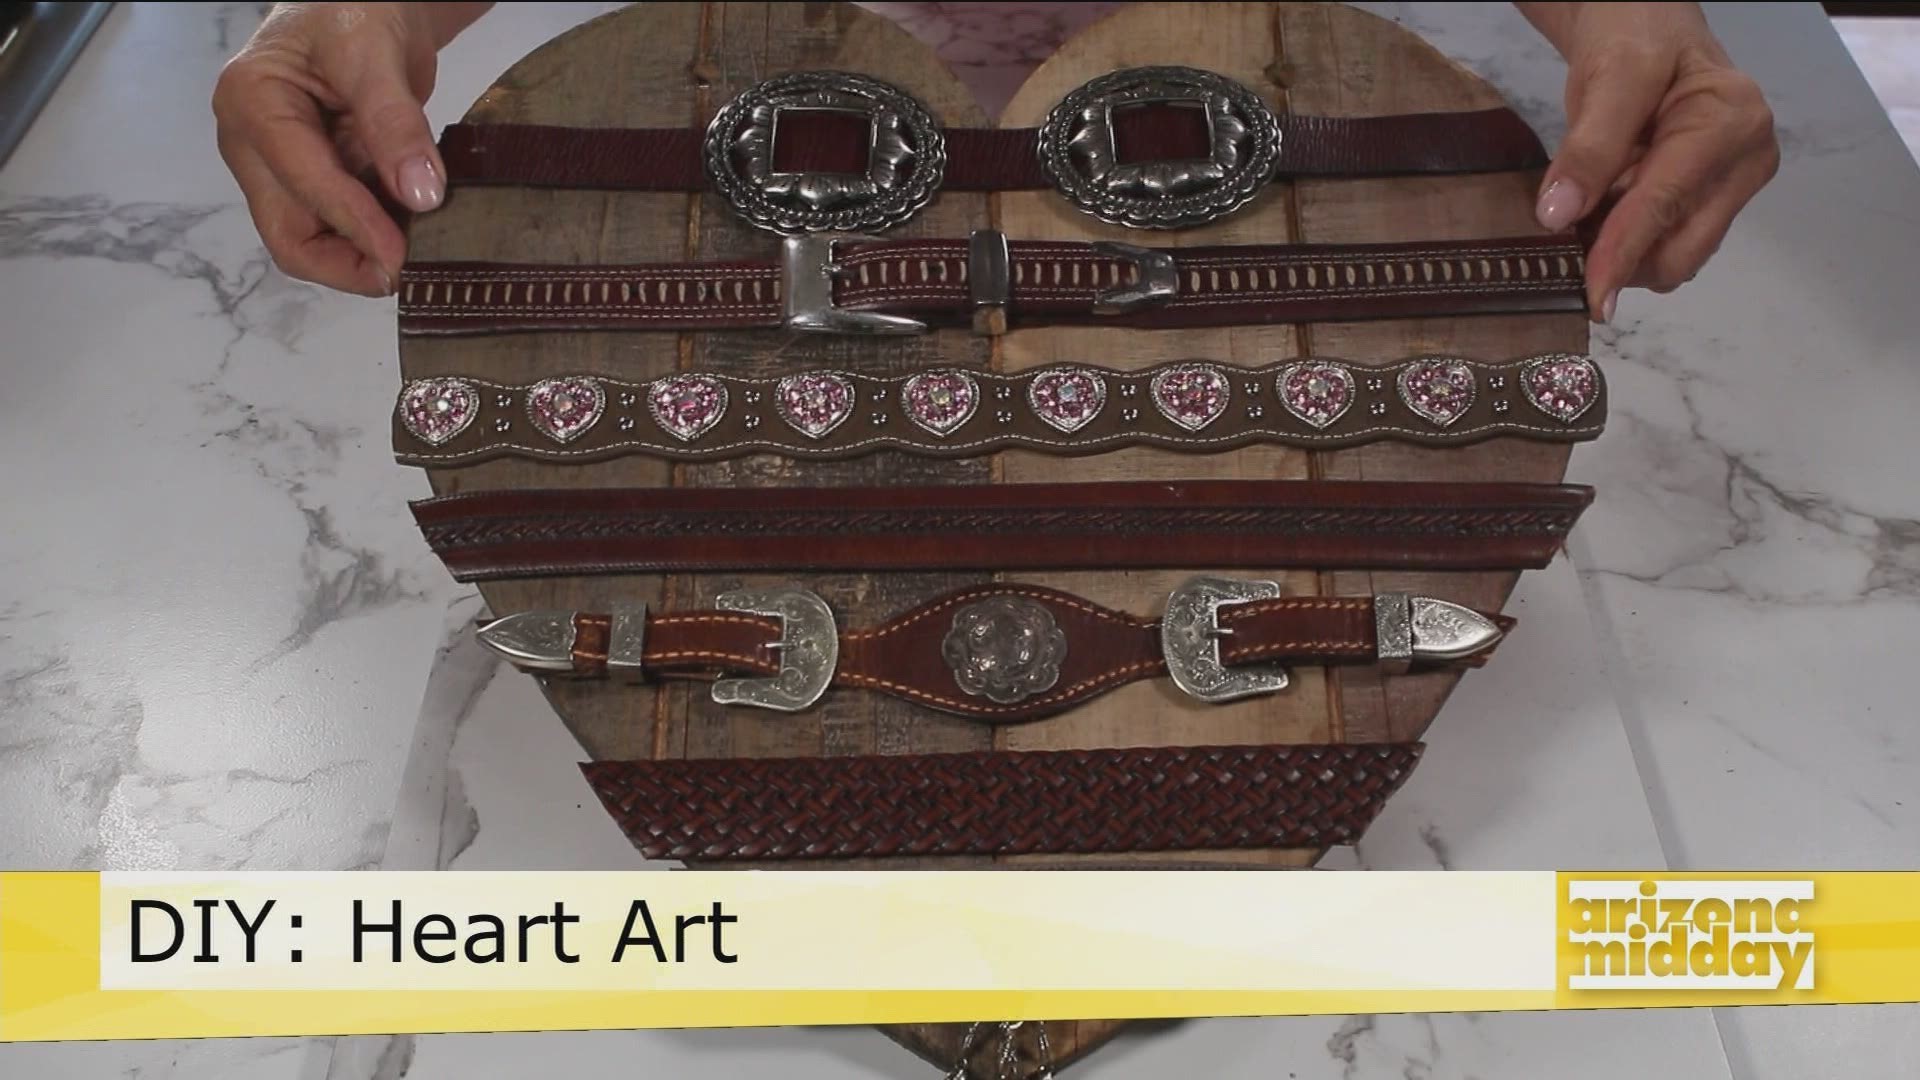 Jan shows us how to create this DIY Heart Art just in time for Valentine's Day!